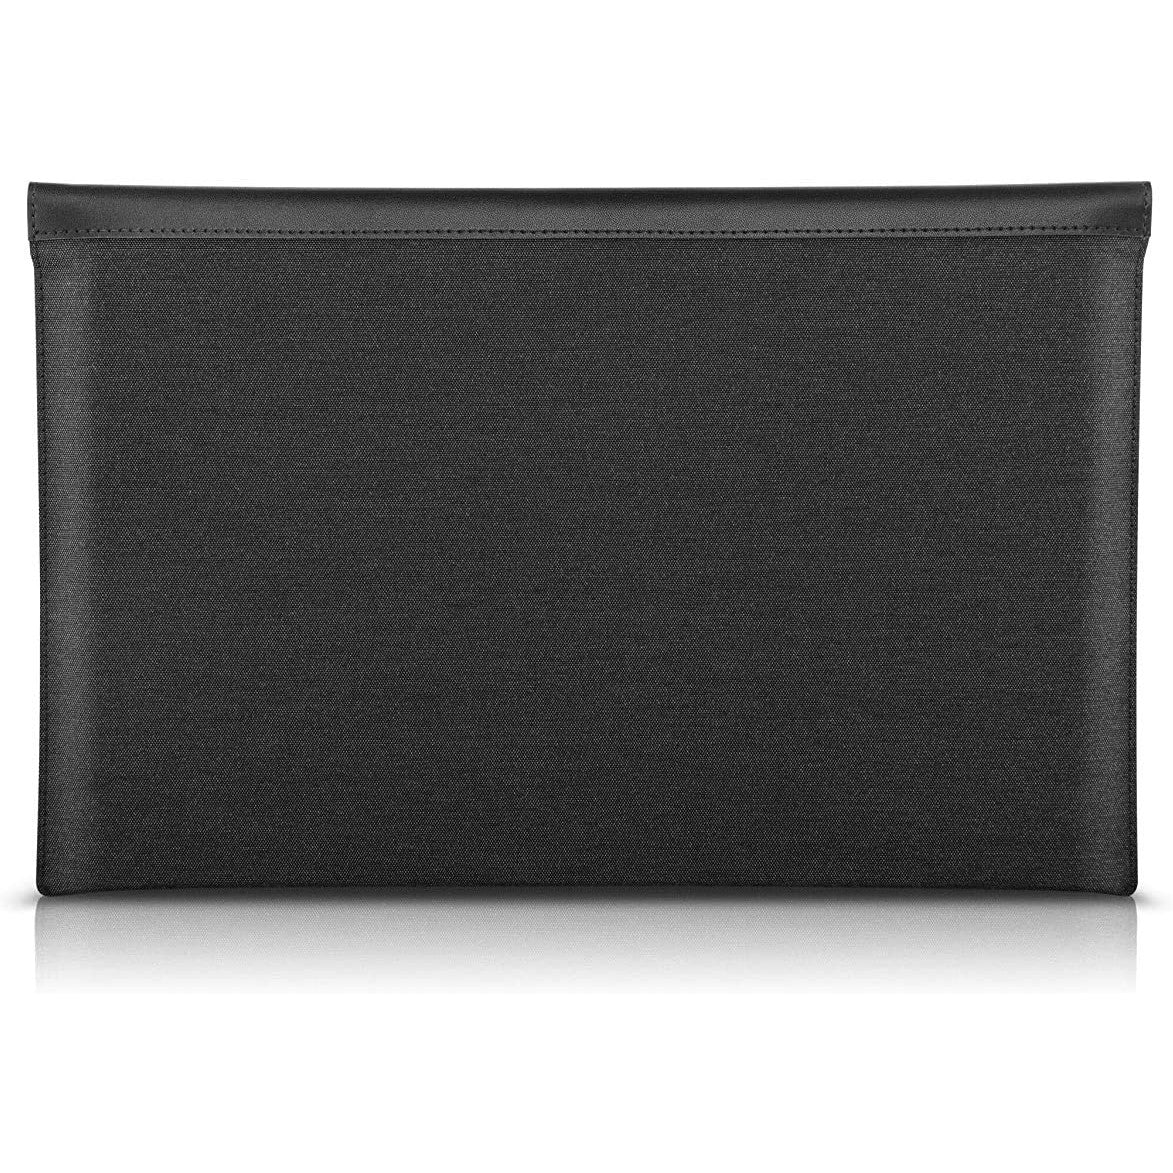 Dell Premier Sleeve for Dell XPS Laptops - Grey